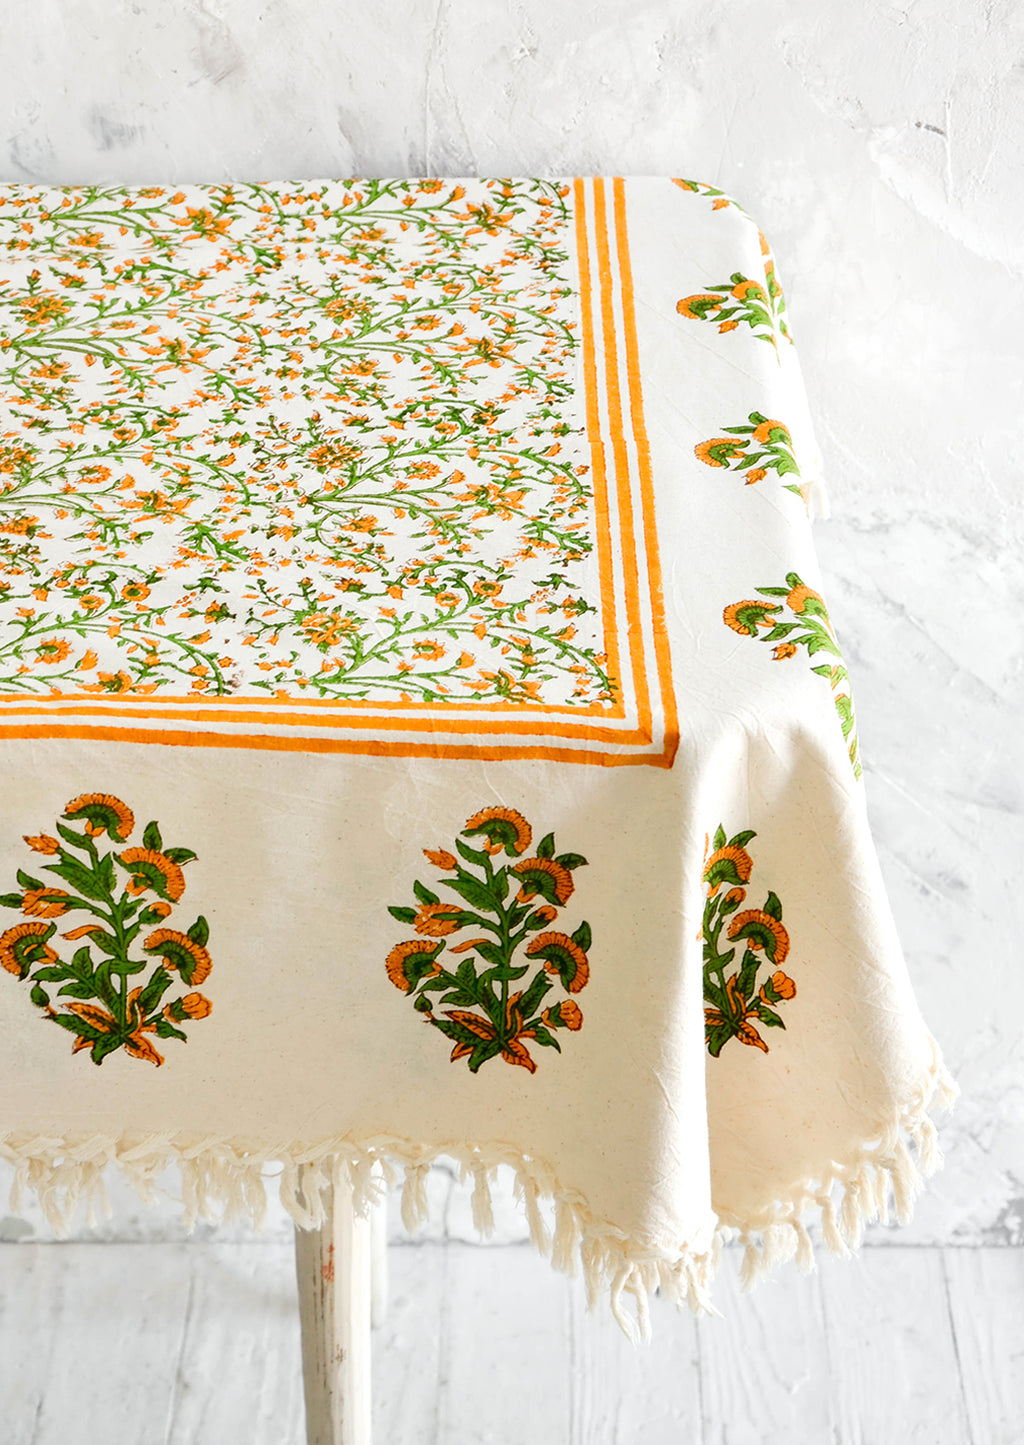 2: Block printed cotton tablecloth with orange and green floral pattern and tasseled edges, displayed on a table